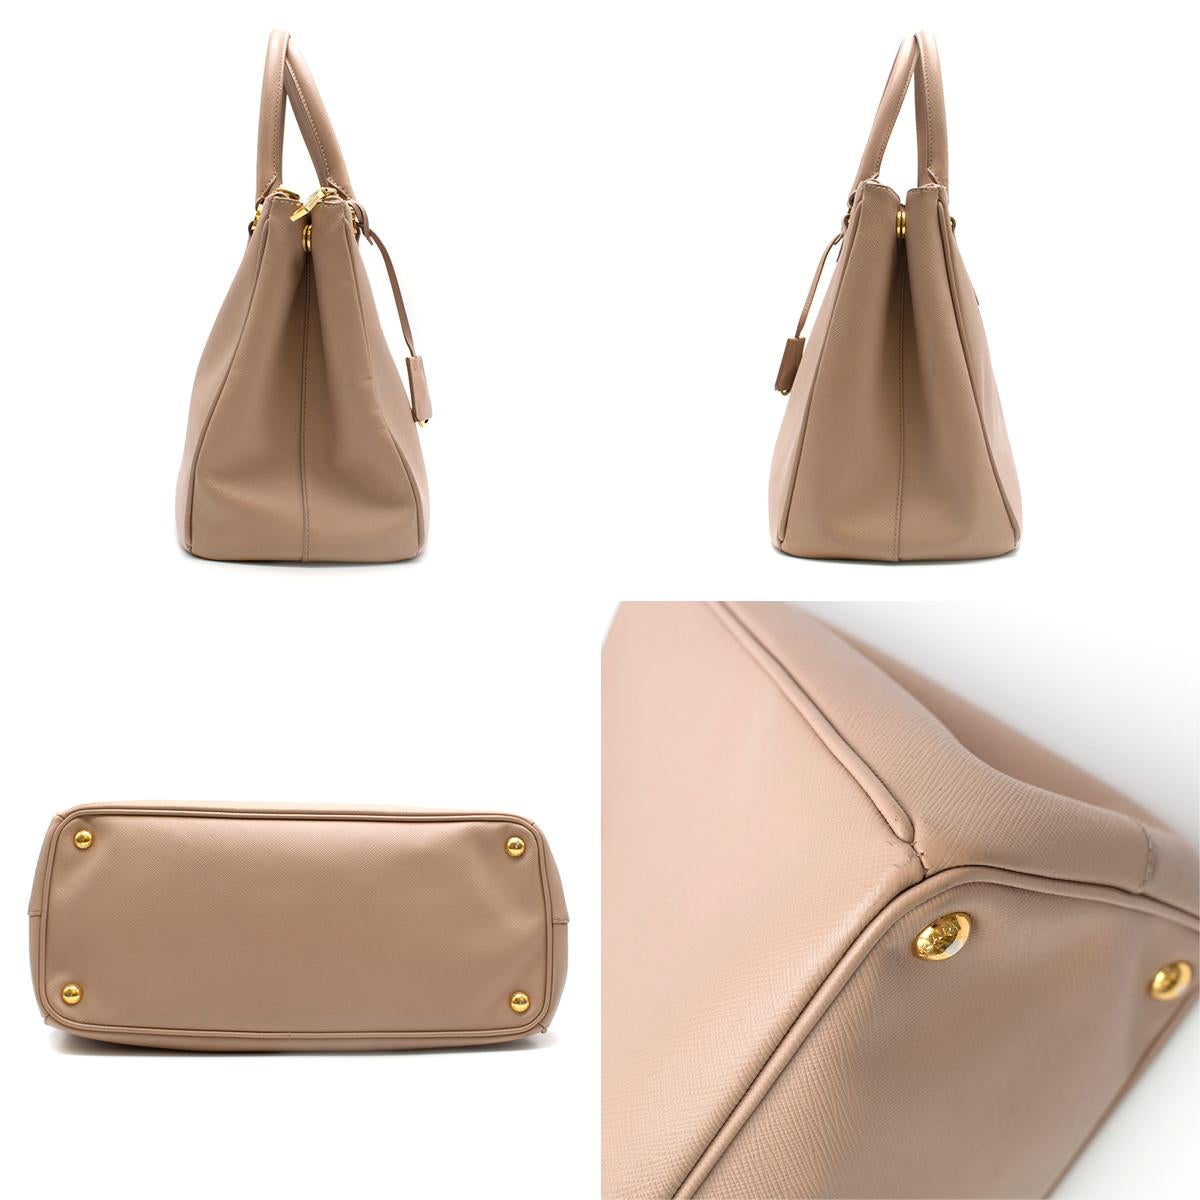 Prada Nude Galleria Large Saffiano Leather Bag

- This deluxe Prada bag is a fan favourite in the fashion world
- This satchel features a saffiano leather body
- Rolled leather handles, a detachable flat leather strap
- An open top with magnetic